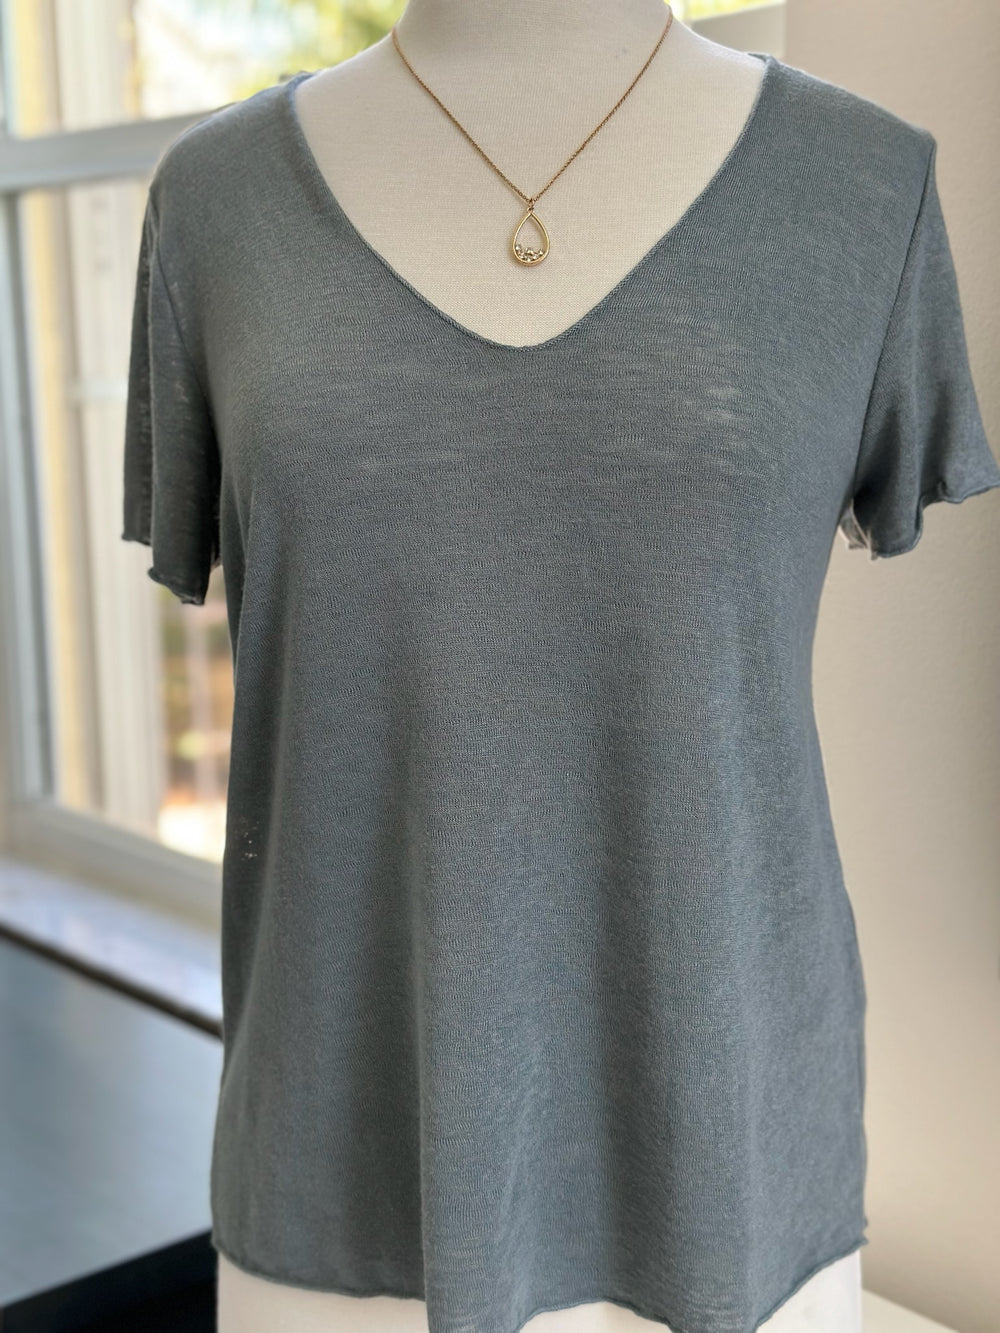 Vicky top in sea grass styled with the rowan necklace